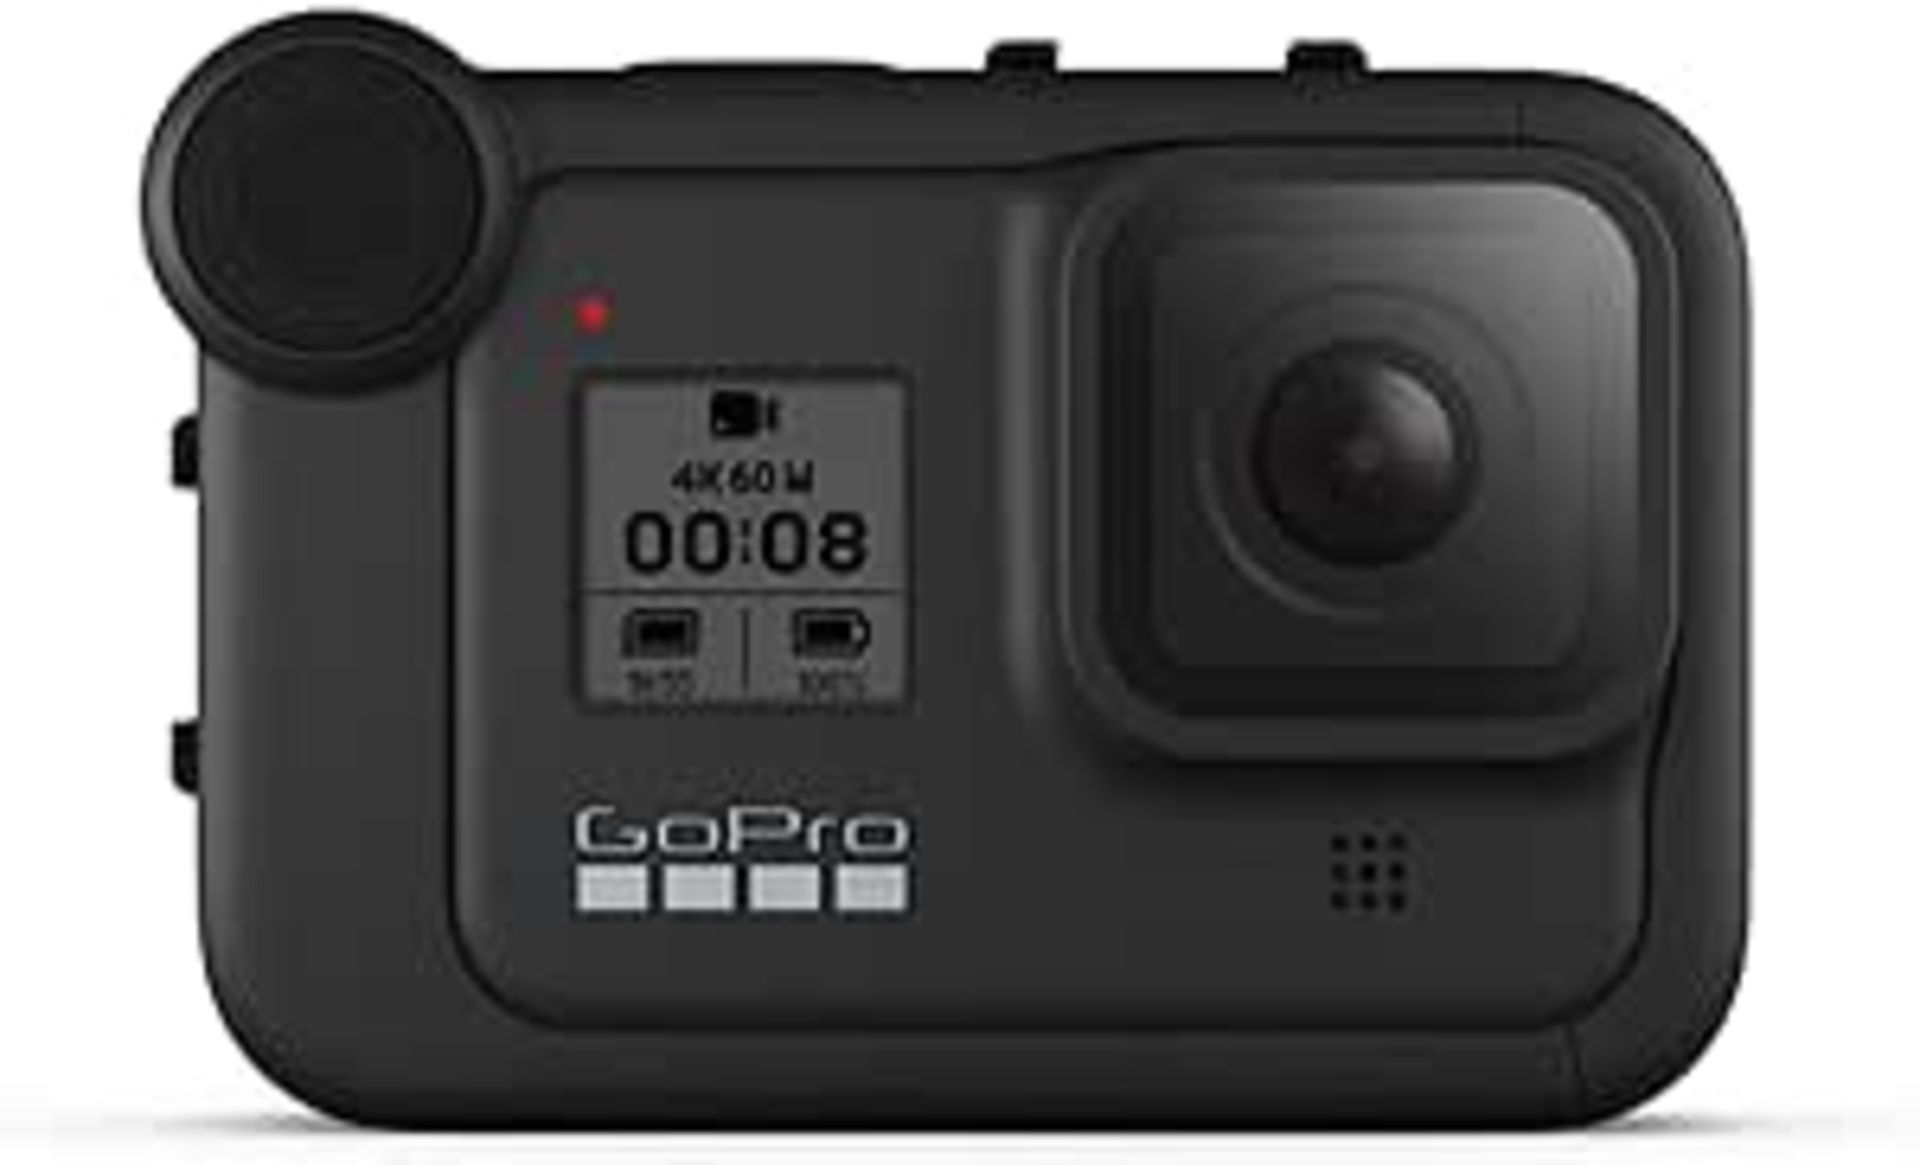 GOPRO HERO8 BLACK - WATERPROOF 4K DIGITAL ACTION CAMERA WITH HYPERSMOOTH STABILISATION, TOUCH SCREEN